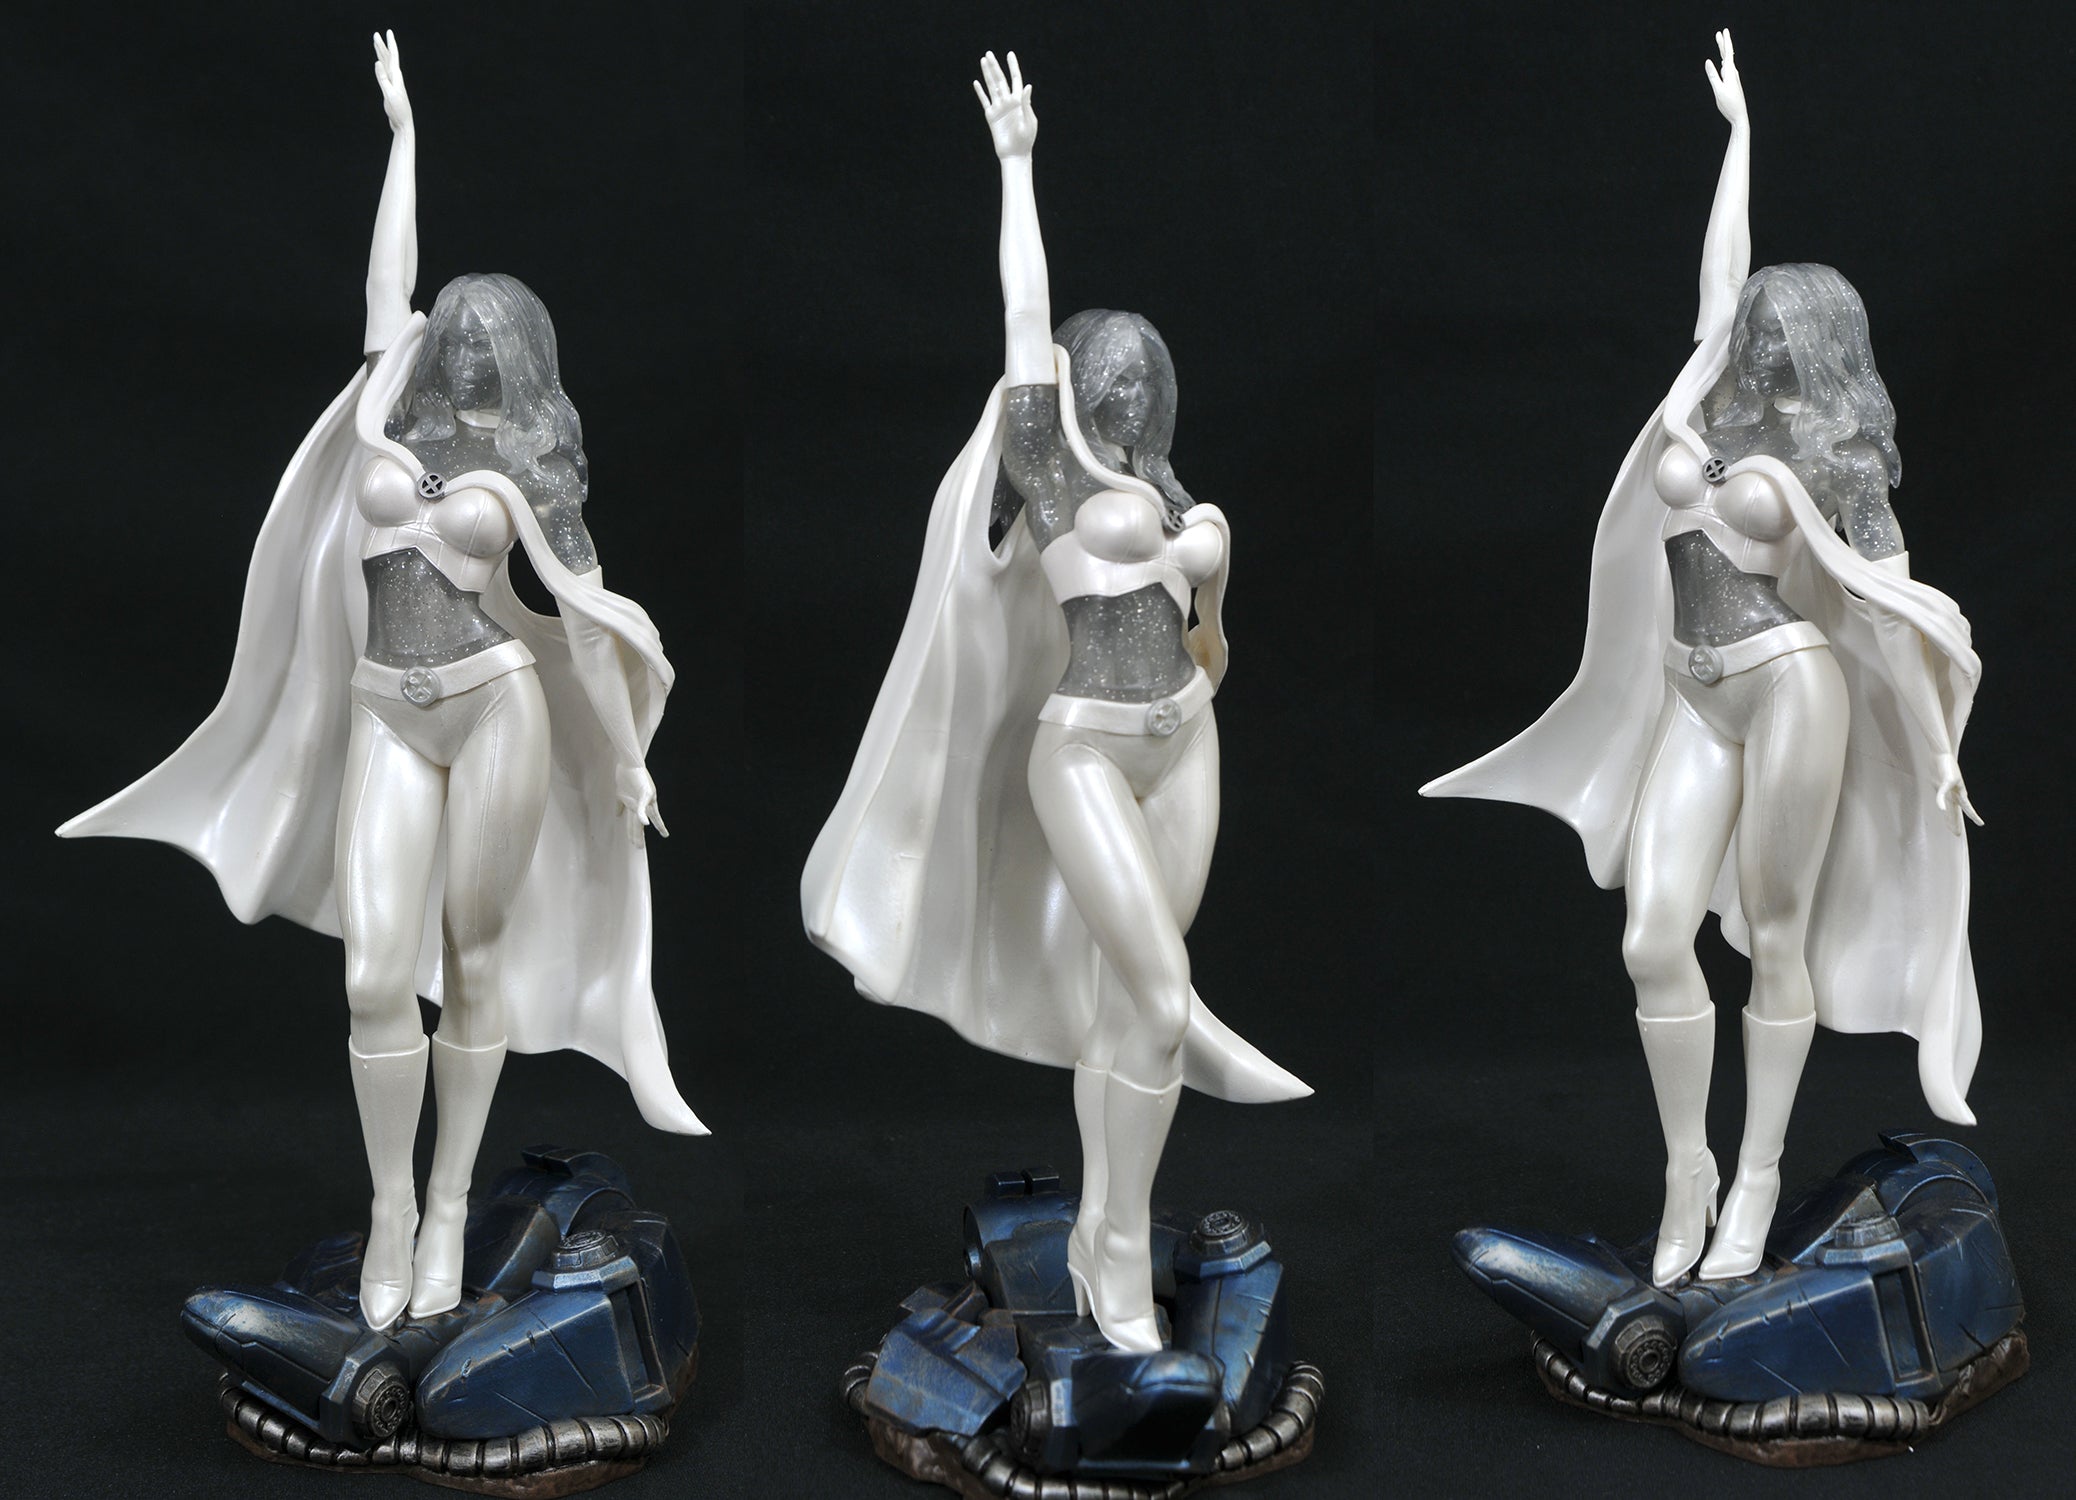 MARVEL GALLERY COMIC EMMA FROST PVC STATUE | BD Cosmos